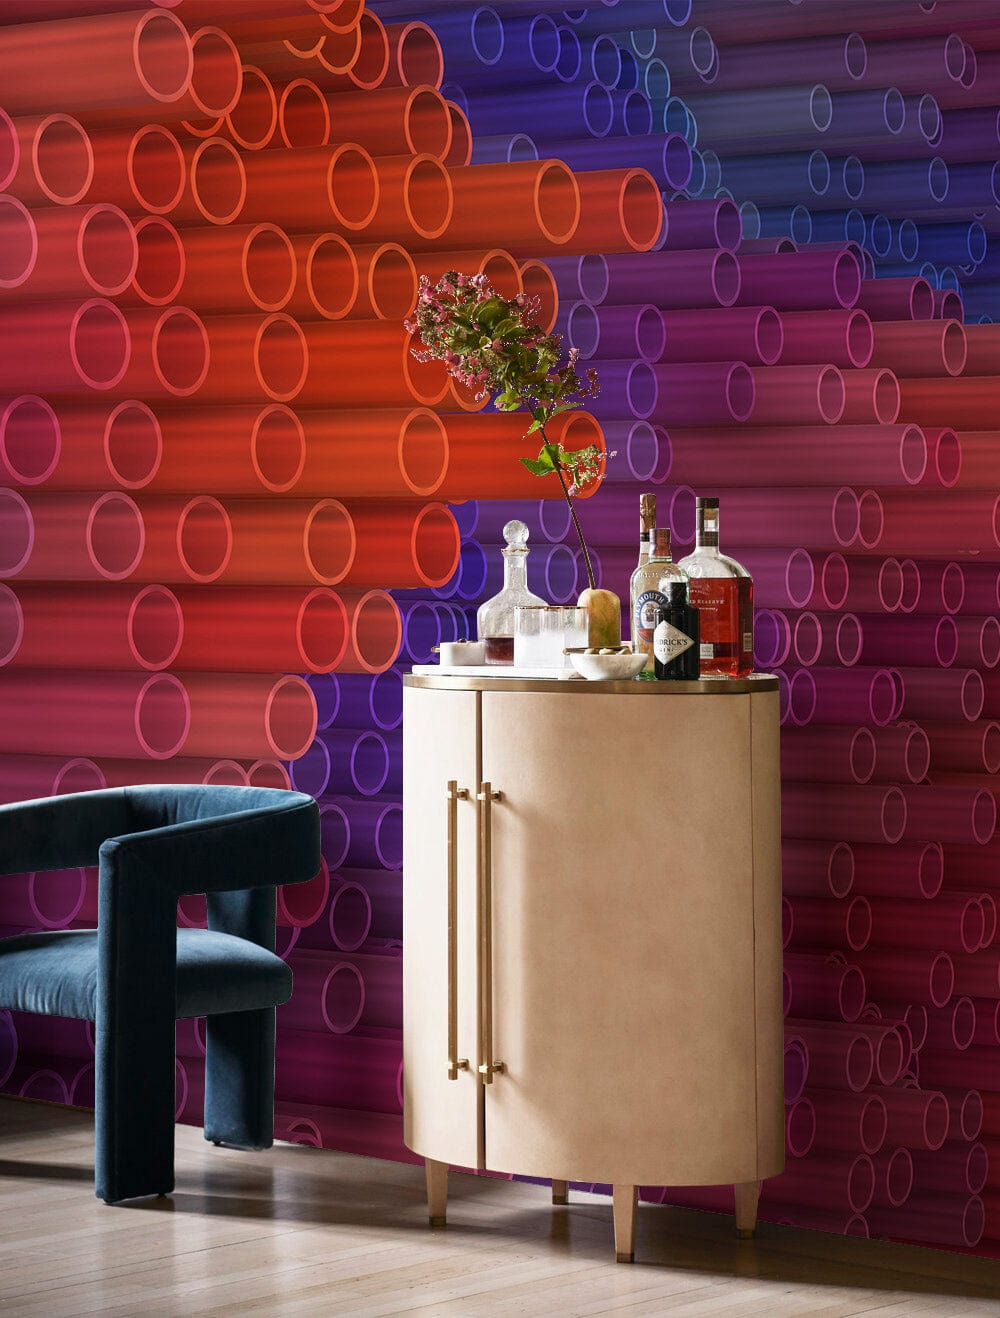 Pipeline Patterns in Vibrant Colors Photo Murals in the Living Room